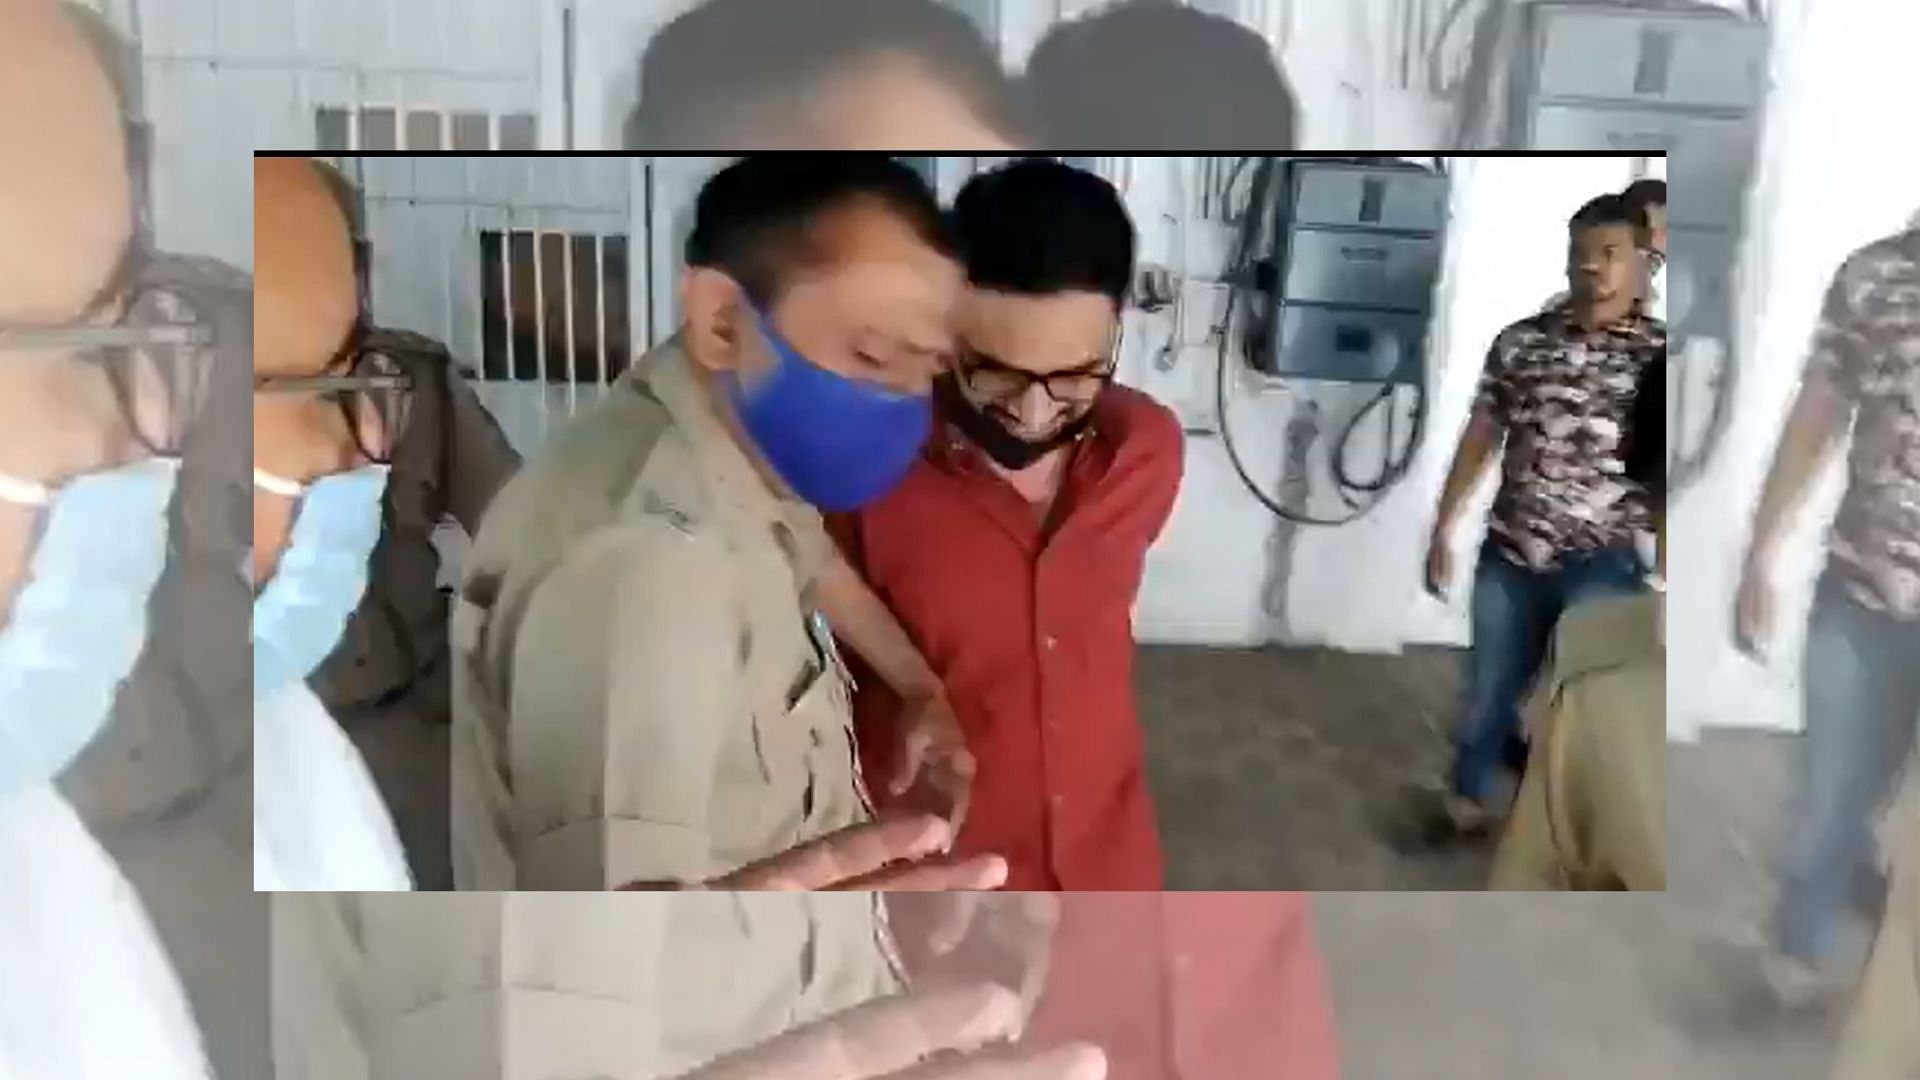 Khalid is currently in judicial custody in connection with the Delhi riots case.